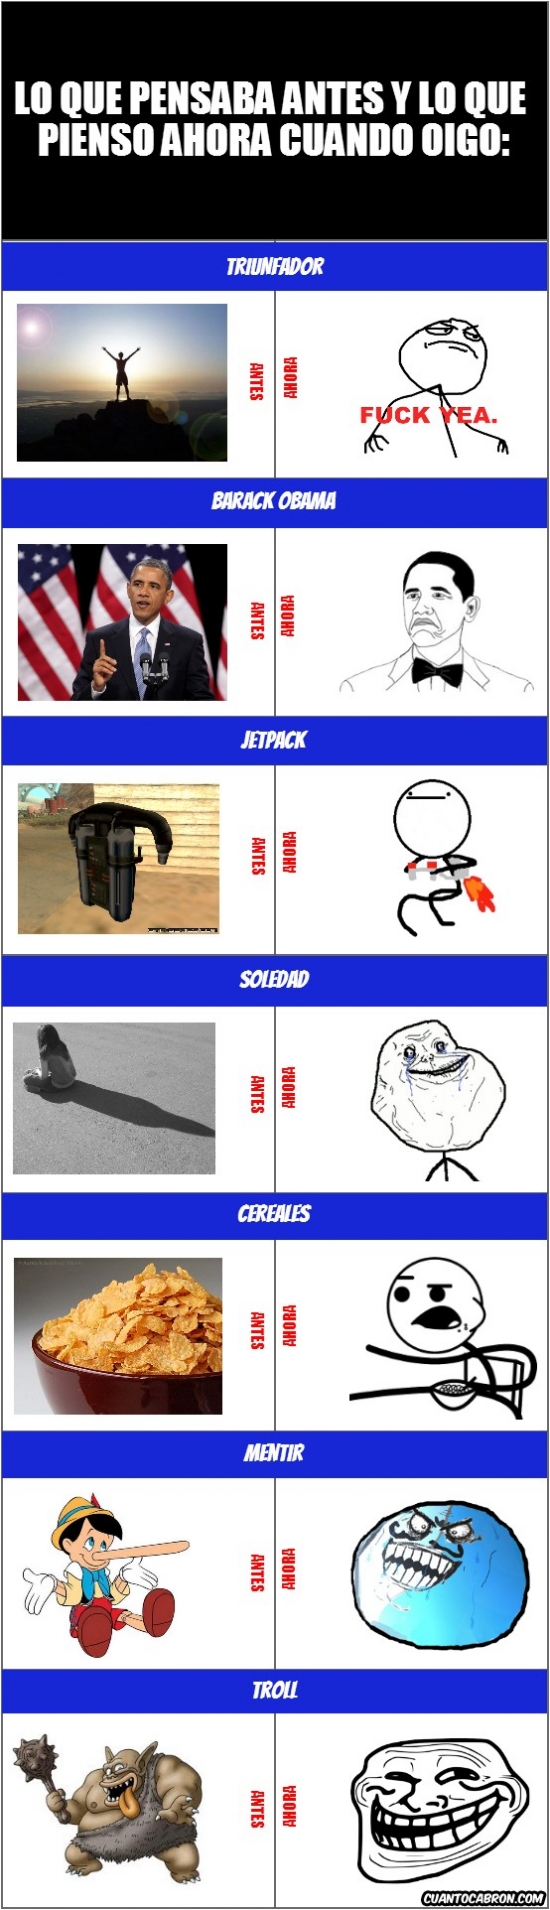 cereal guy,forever alone,mentí,not bad,nothing to do here,trollface